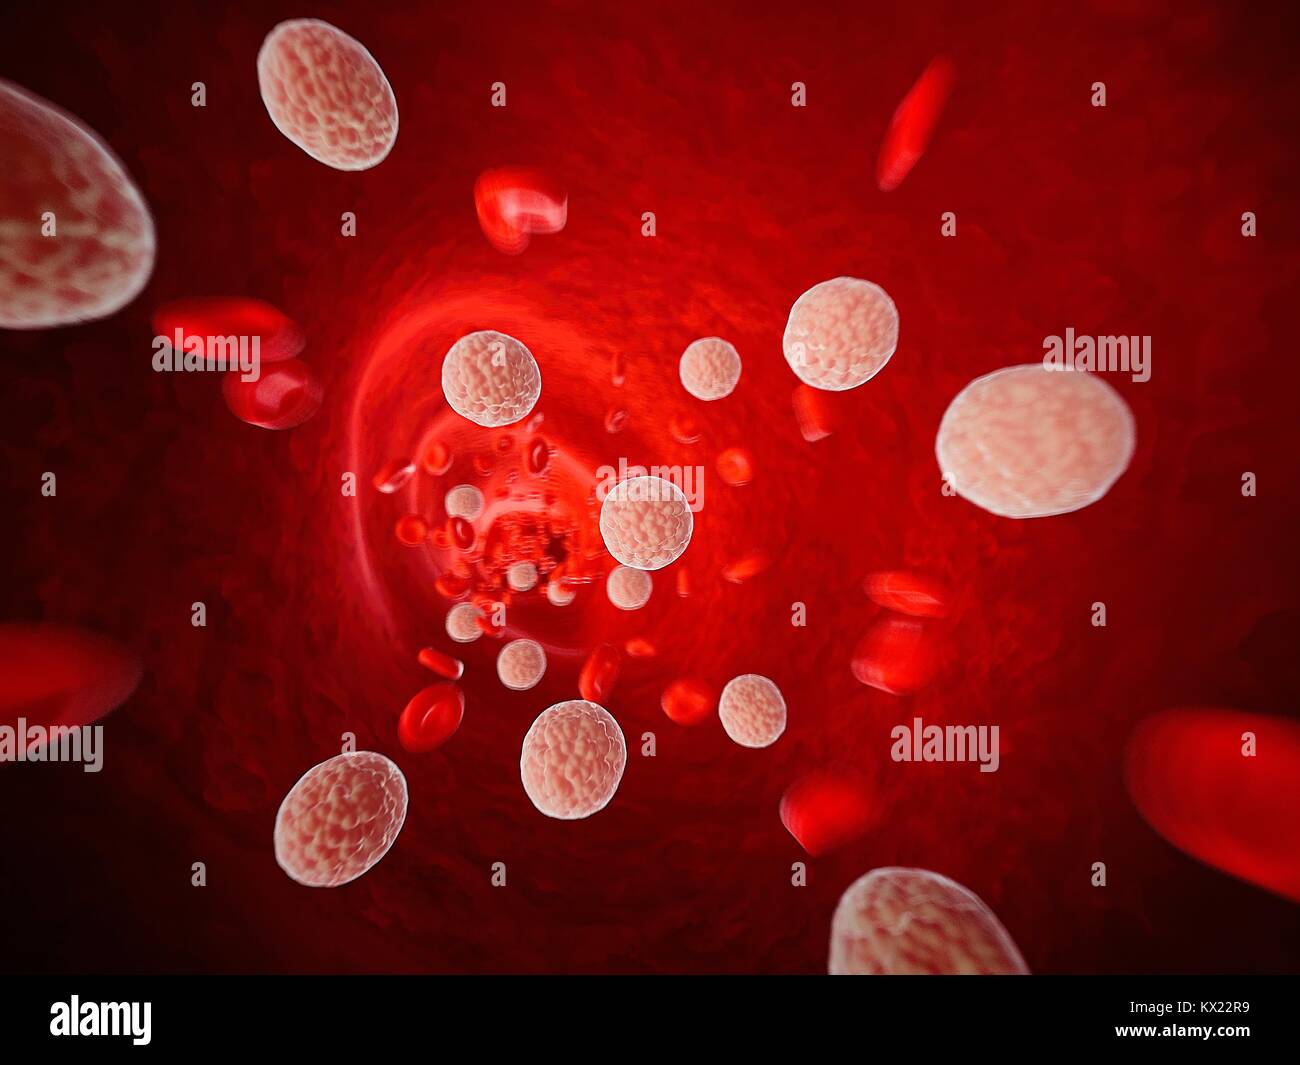 Cholesterol in the human blood, illustration. Stock Photo